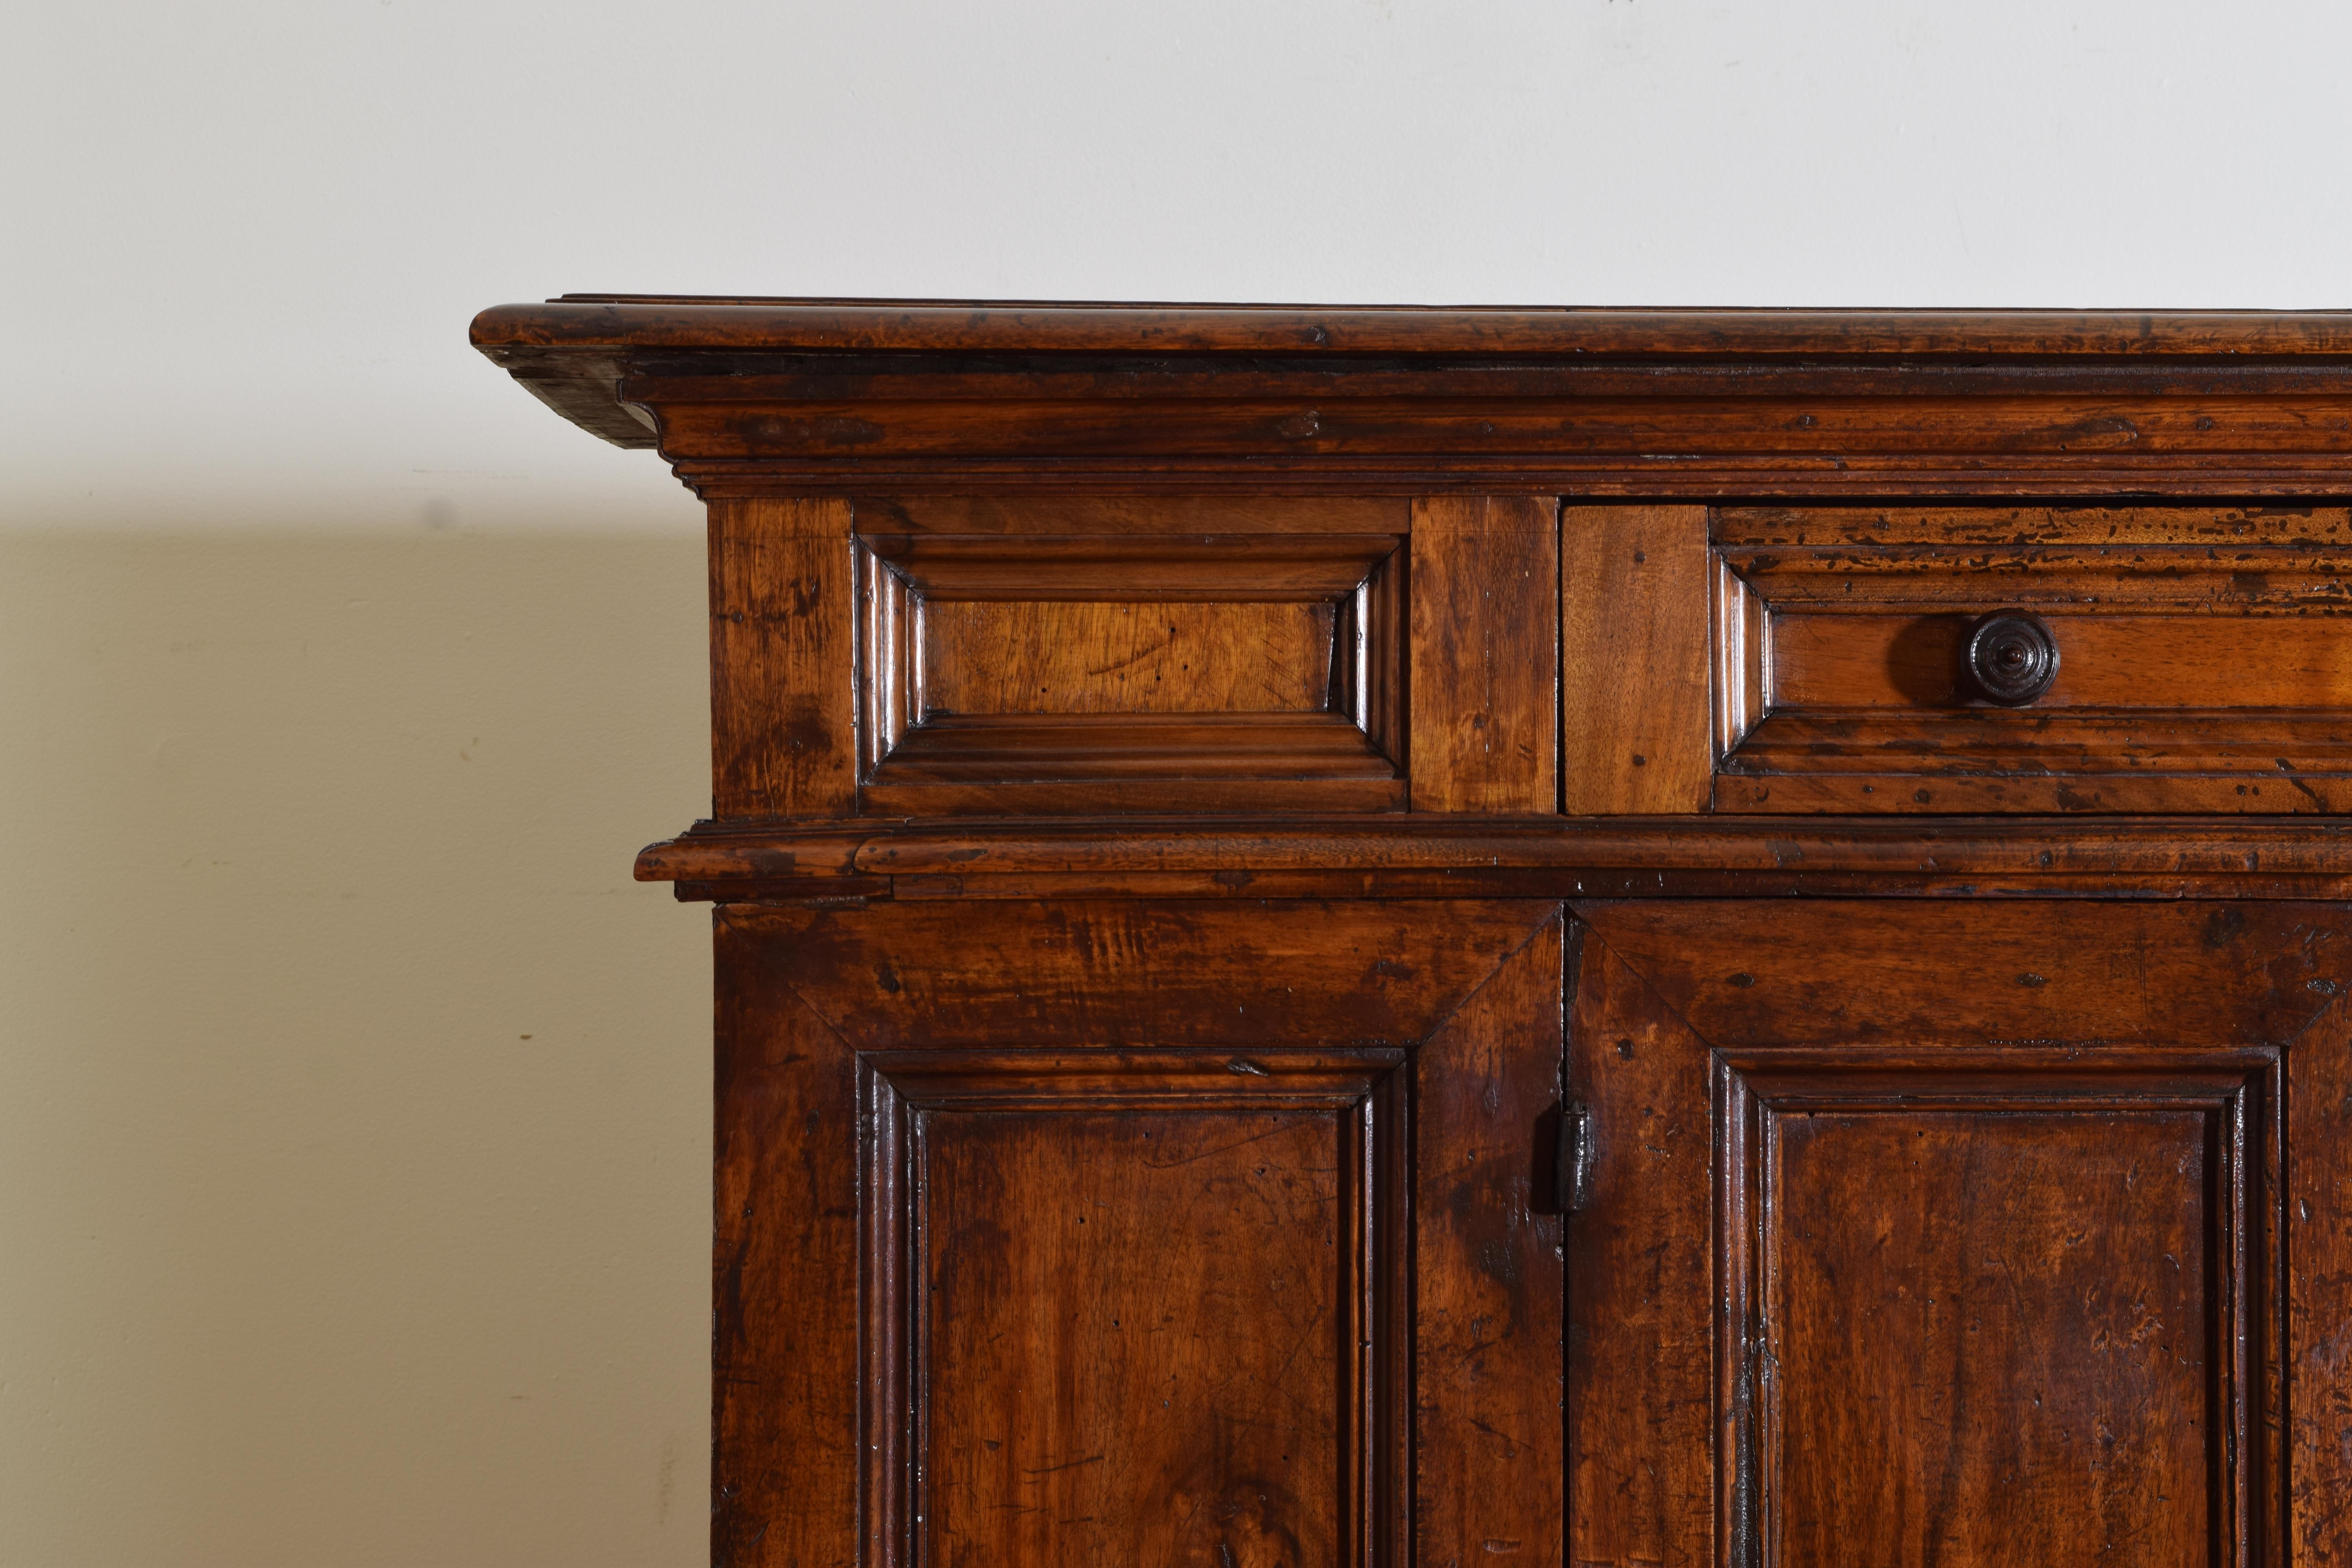 Italian Late Baroque Period Carved Walnut Credenza, late 17th / early 18th cen. For Sale 3